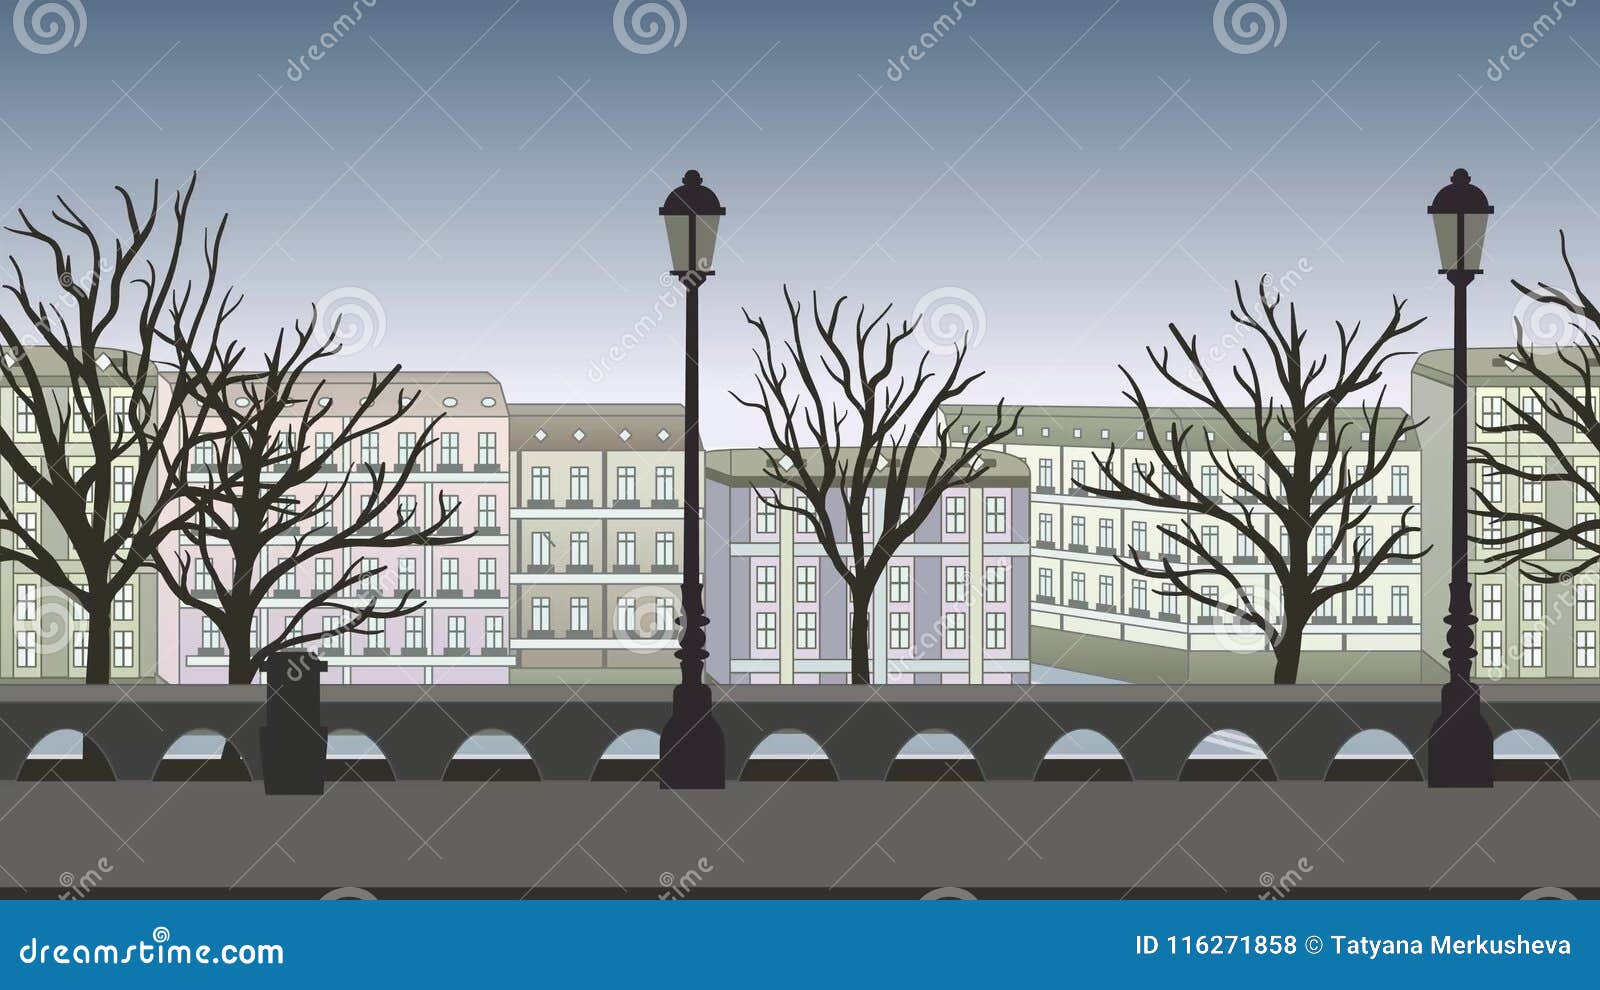 Animated Background. European City Street with Buildings, Trees and  Lampposts. Flat Animation, Parallax. Footage. Stock Footage - Video of  backdrop, building: 116271858